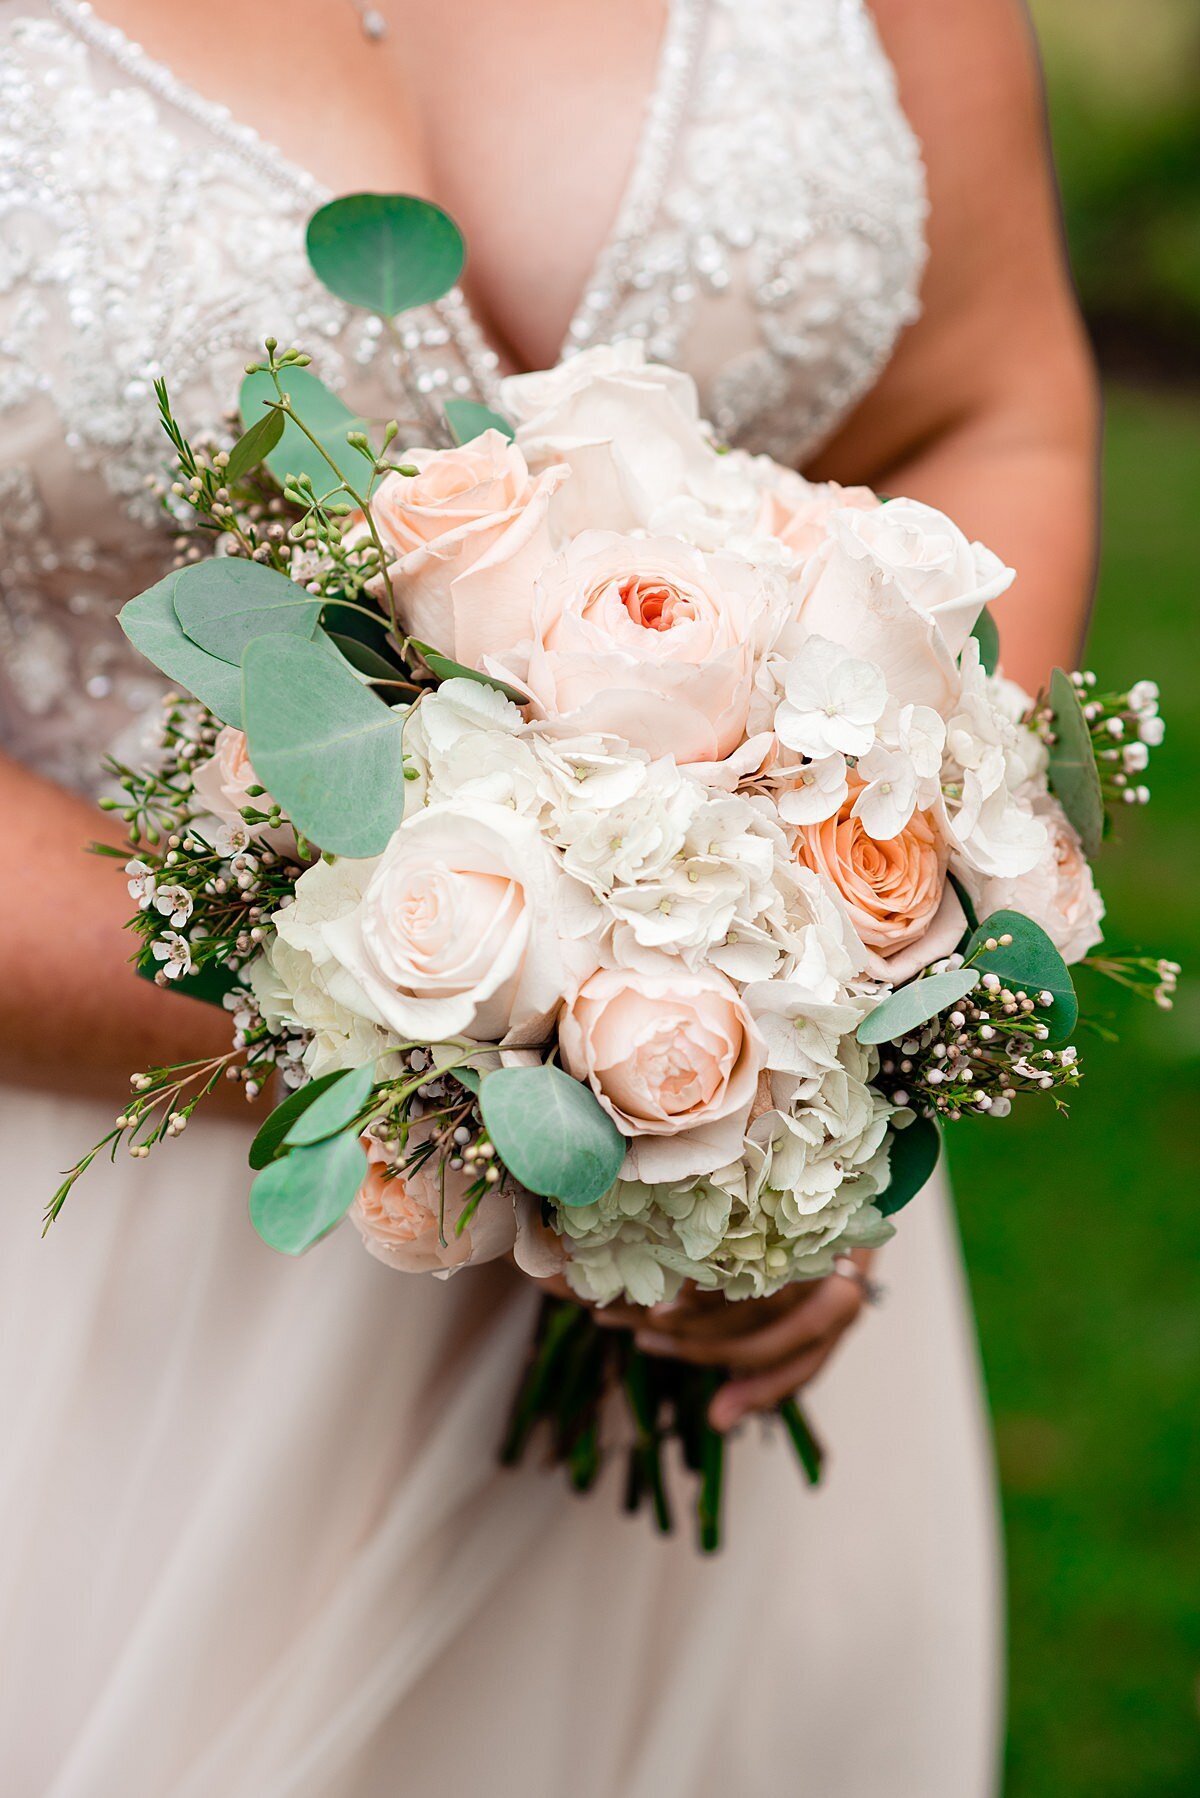 A bride wearing a wedding dress with a beaded bodice and deep v-neck holds a bouquet of white hydrangea, blush roses baby's breath and eucalyptus.